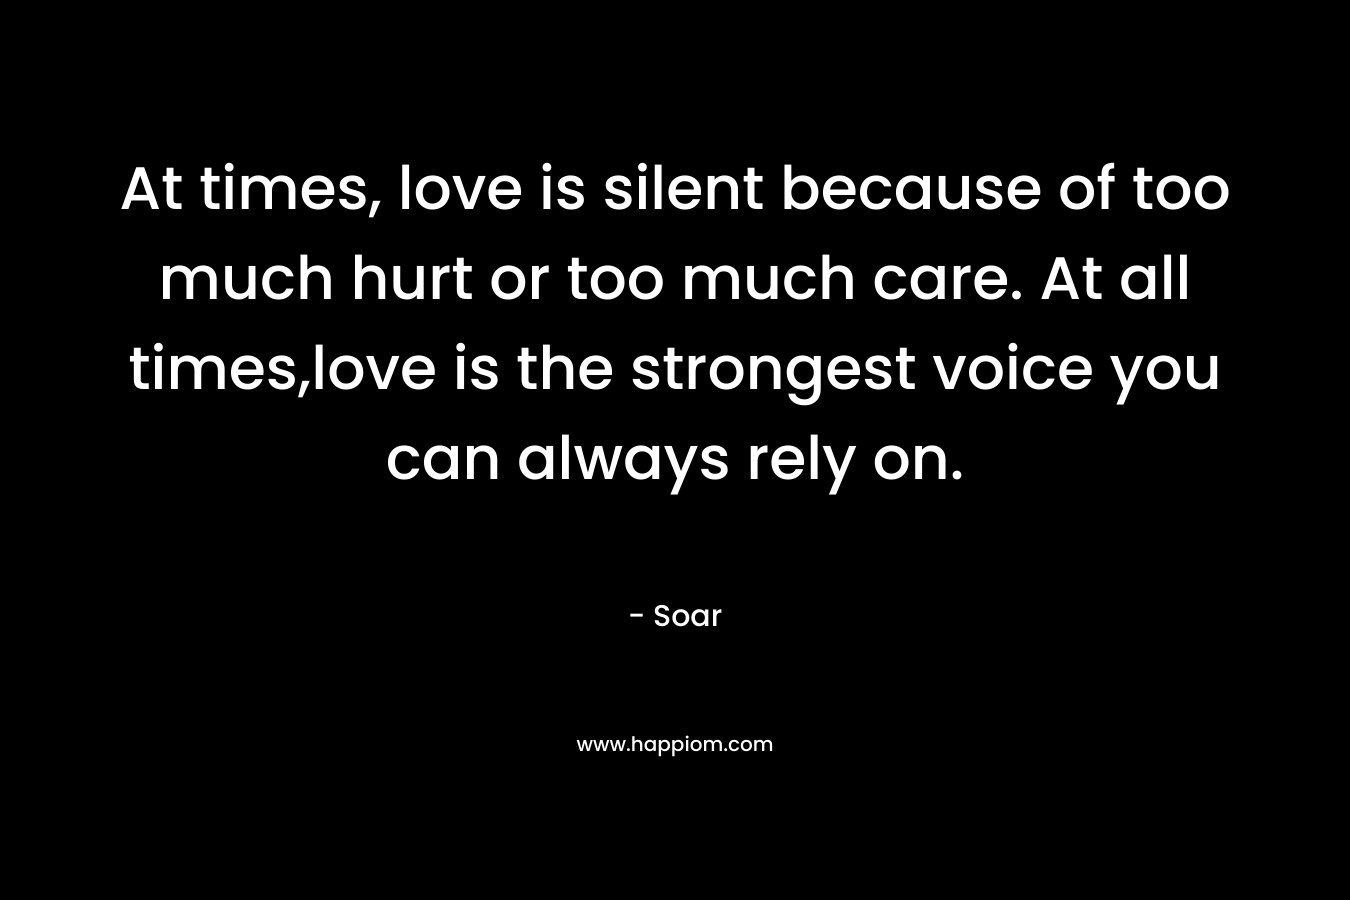 At times, love is silent because of too much hurt or too much care. At all times,love is the strongest voice you can always rely on.